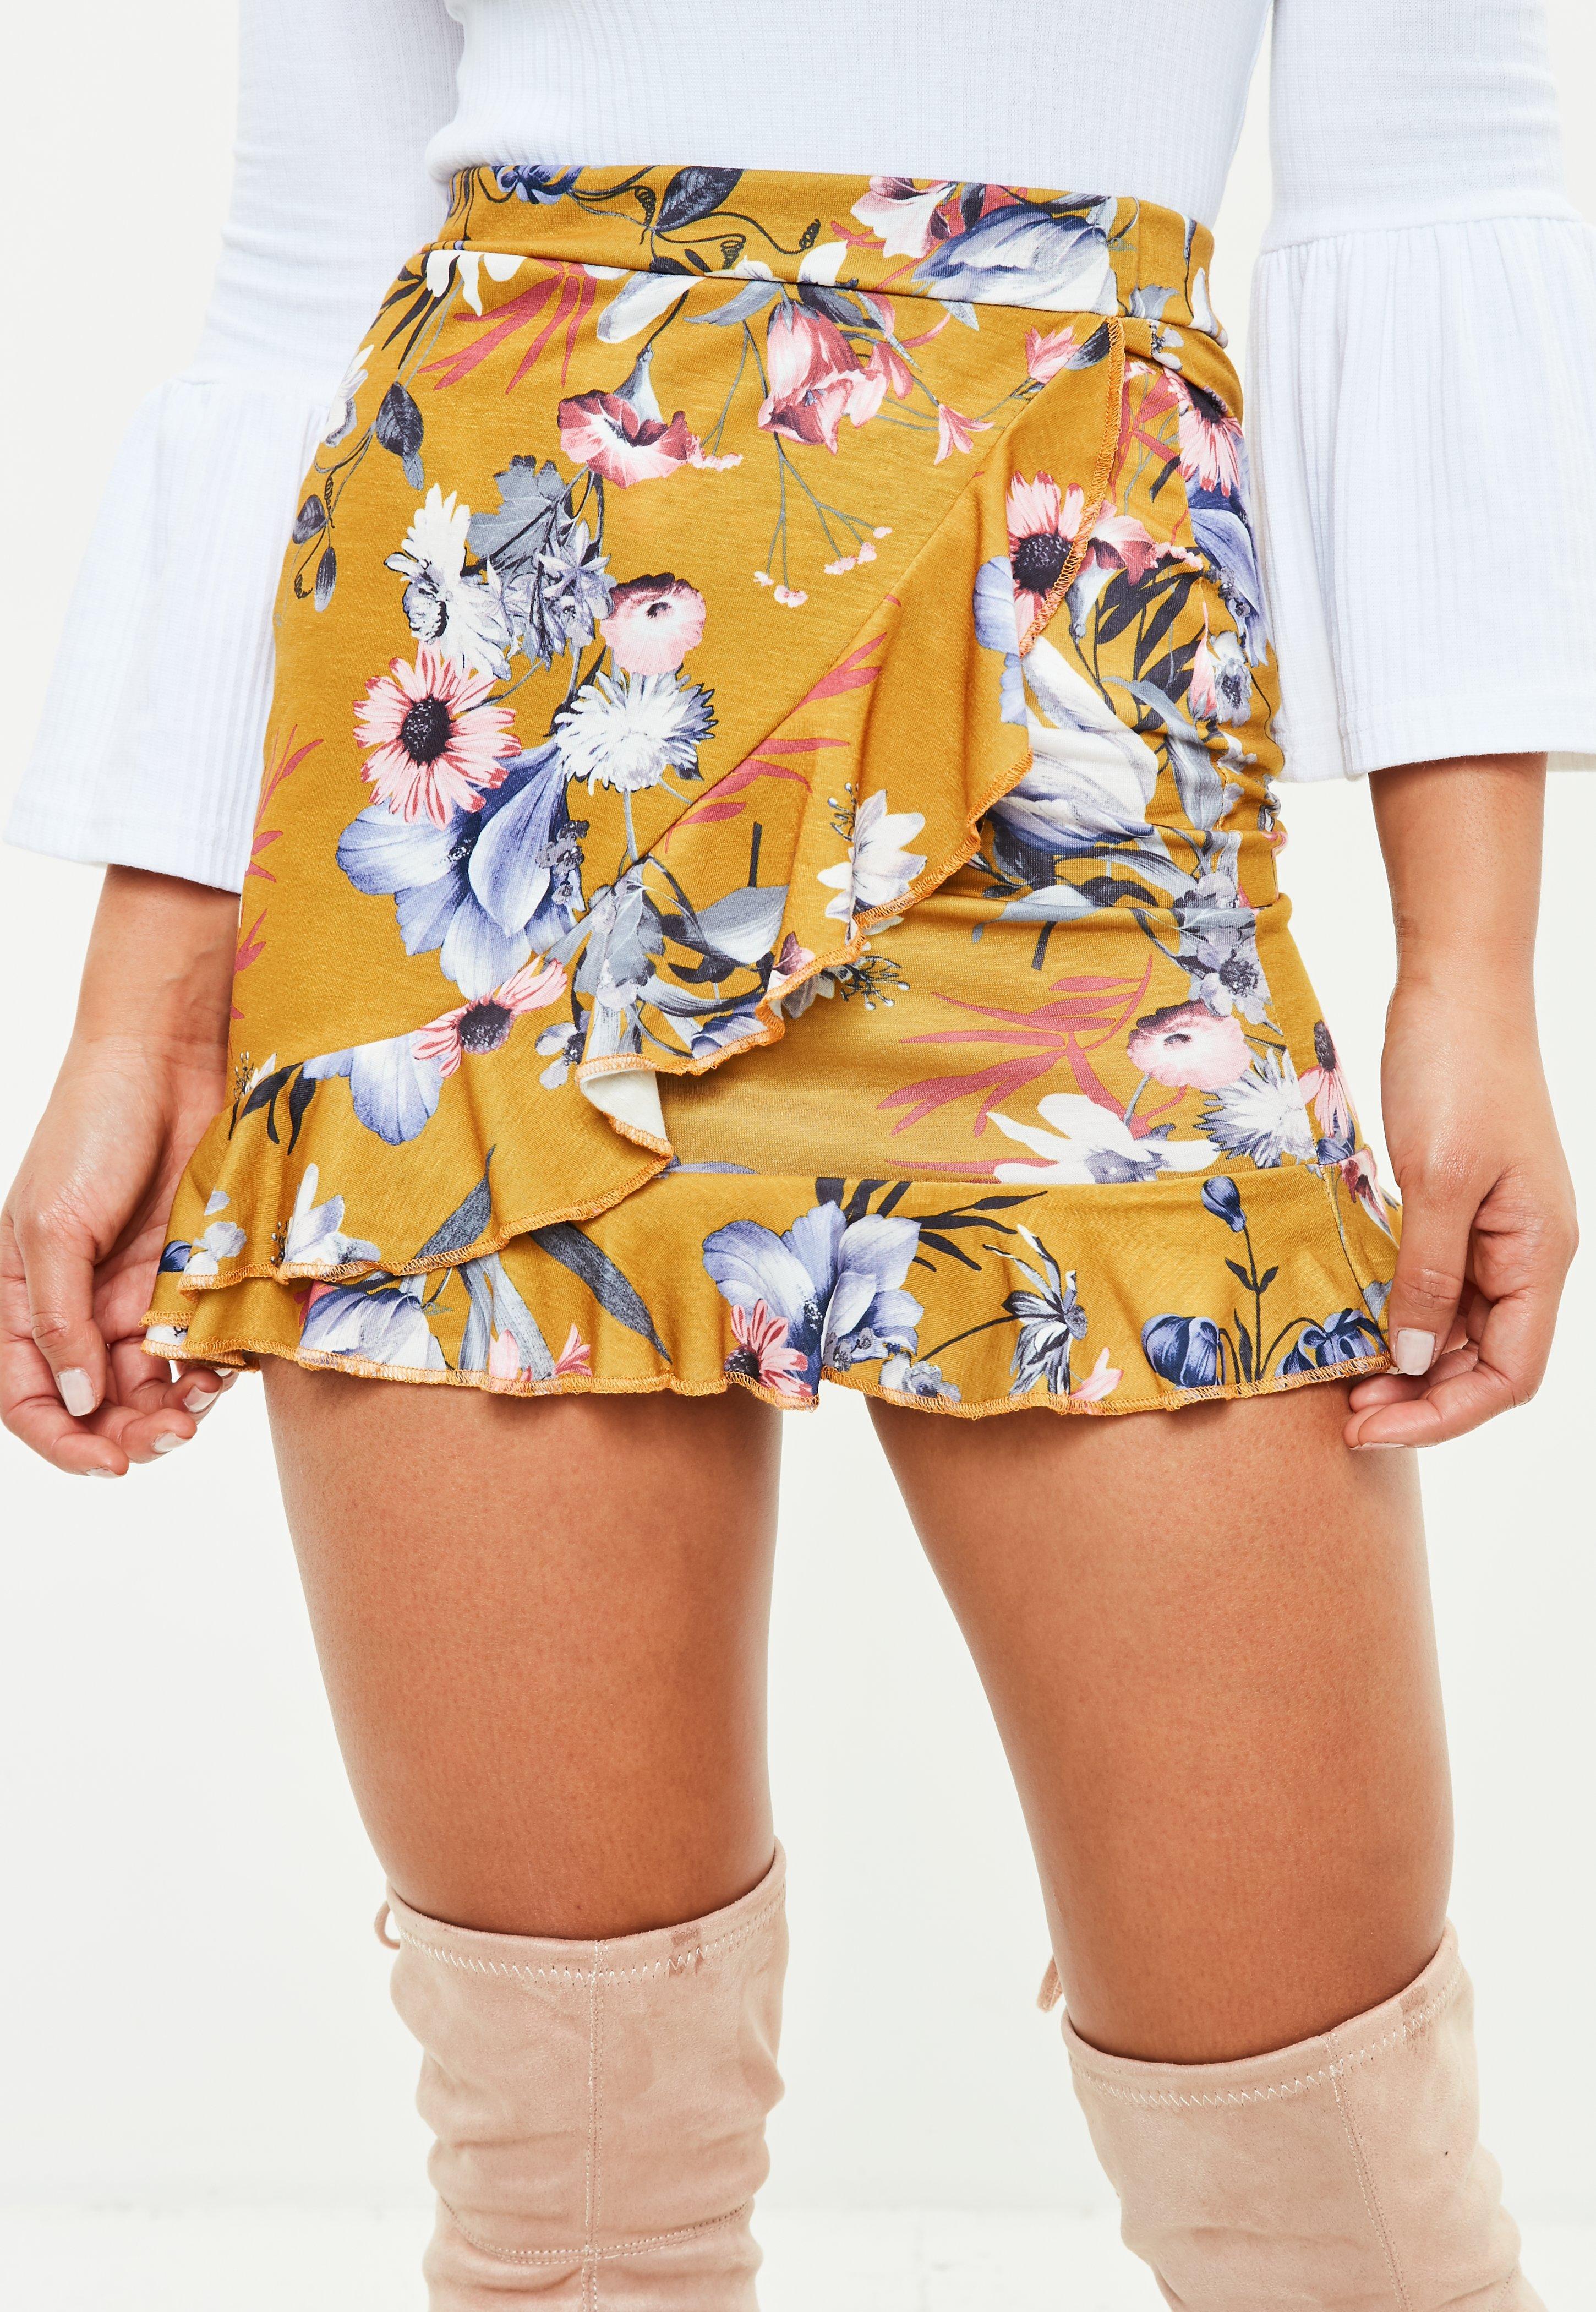 Lyst - Missguided Mustard Yellow Floral Wrap Mini Skirt in Yellow